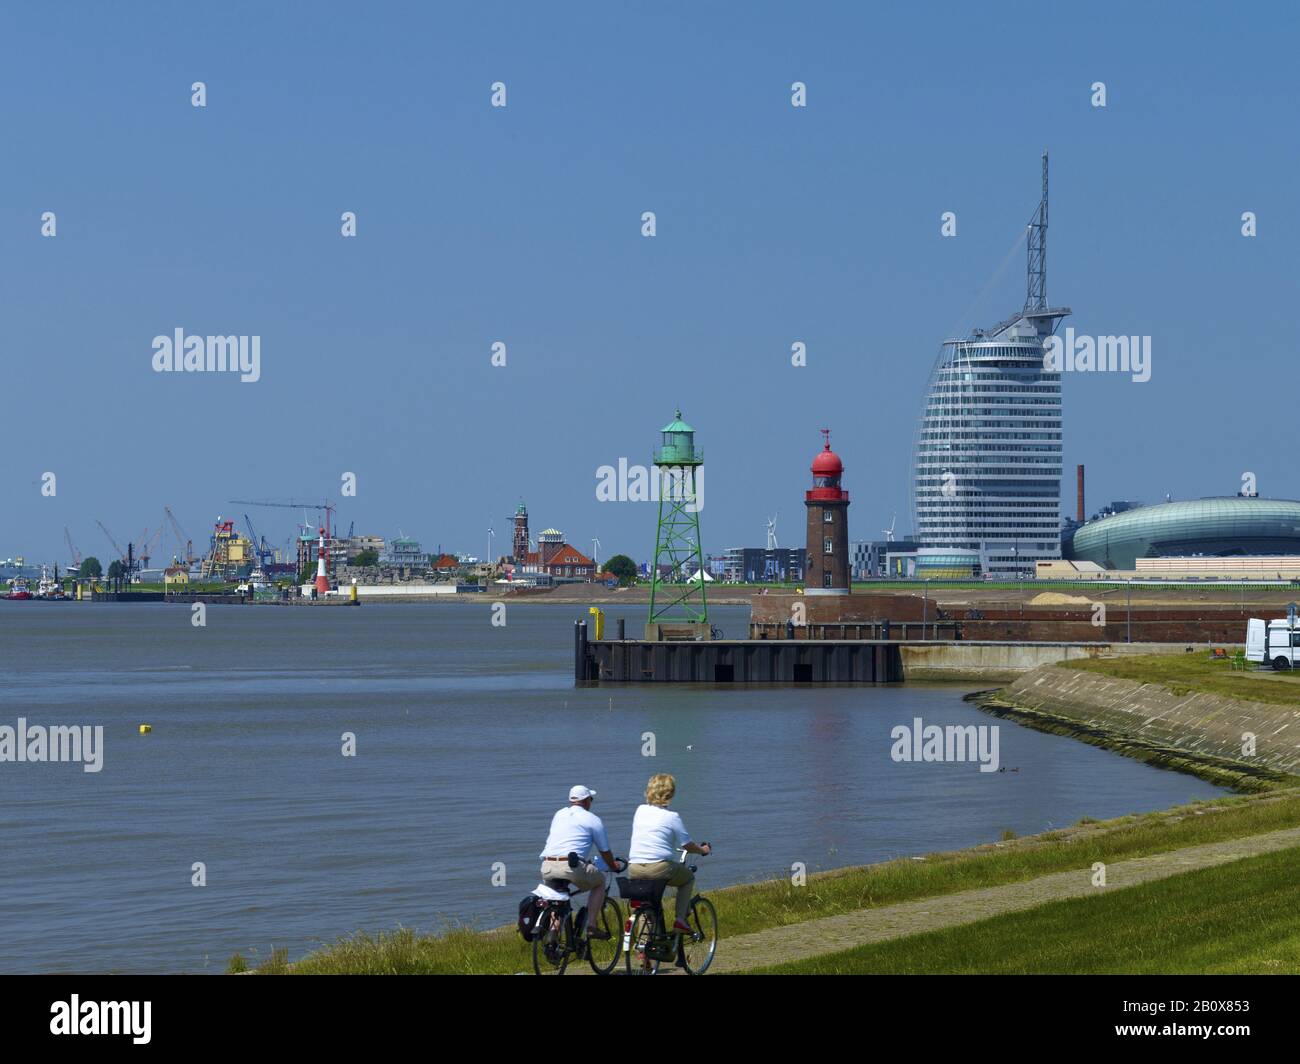 Entrance to the fishing port with Atlantic Hotel Sail City, Klimahaus and Mediterraneo, Bremerhaven, Bremen, Germany, Stock Photo